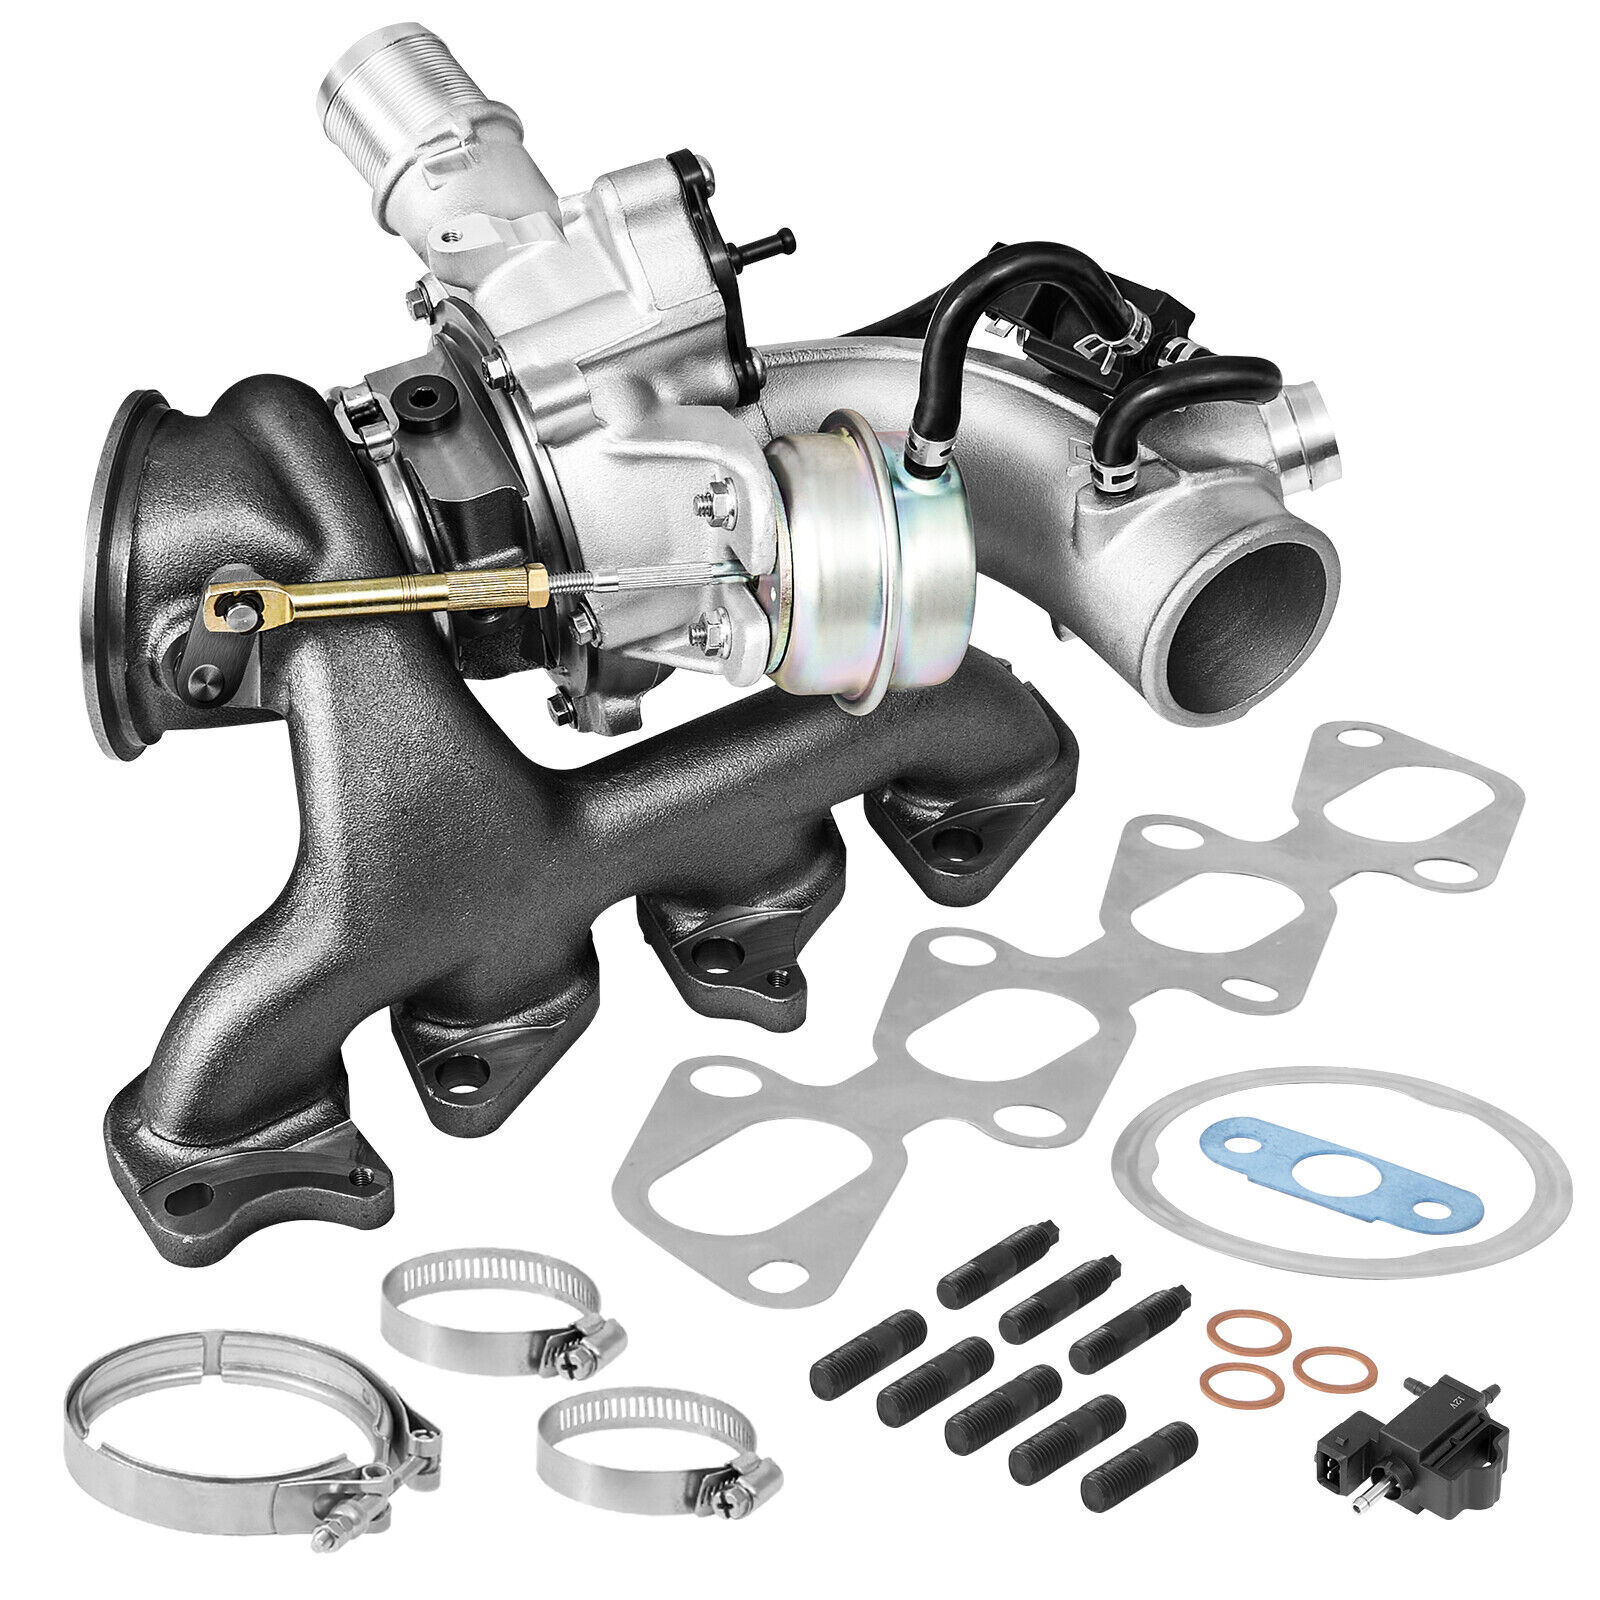 New Turbo Turbocharger for Chevy Cruze Sonic Trax & Buick Encore 55565353 1.4L